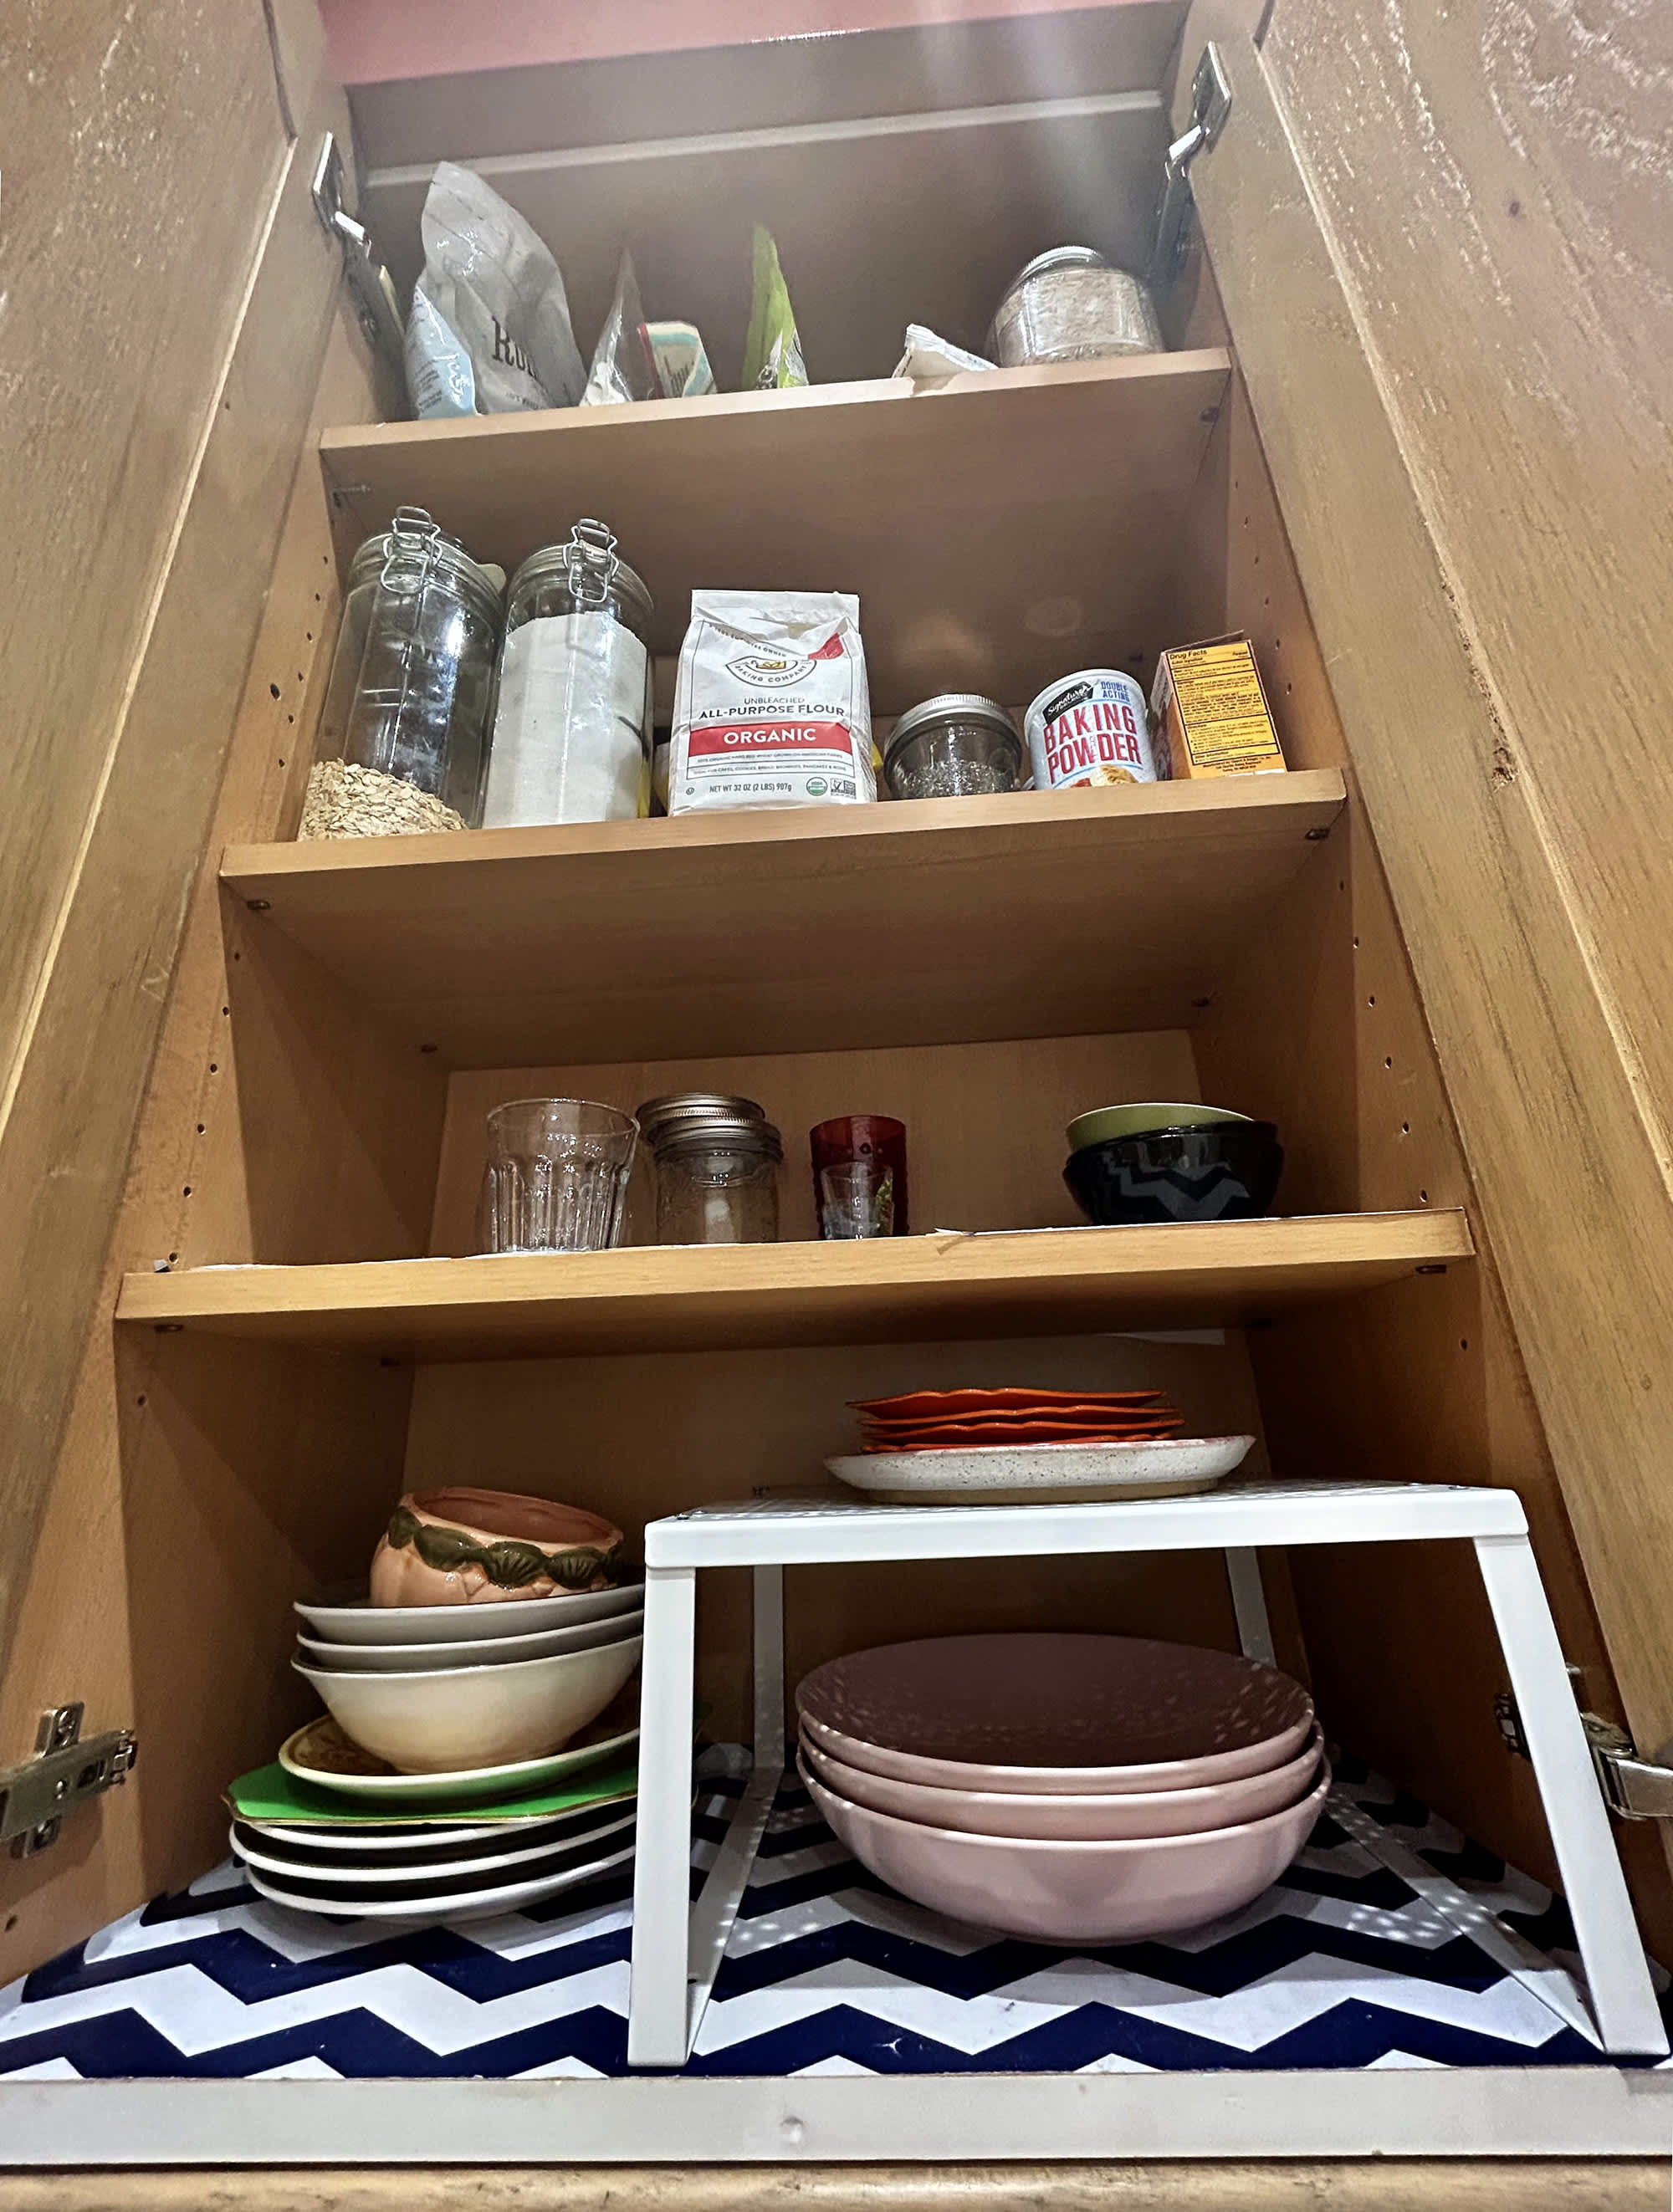 How to Use IKEA VARIERA Shelf Insert for More Cabinet Space